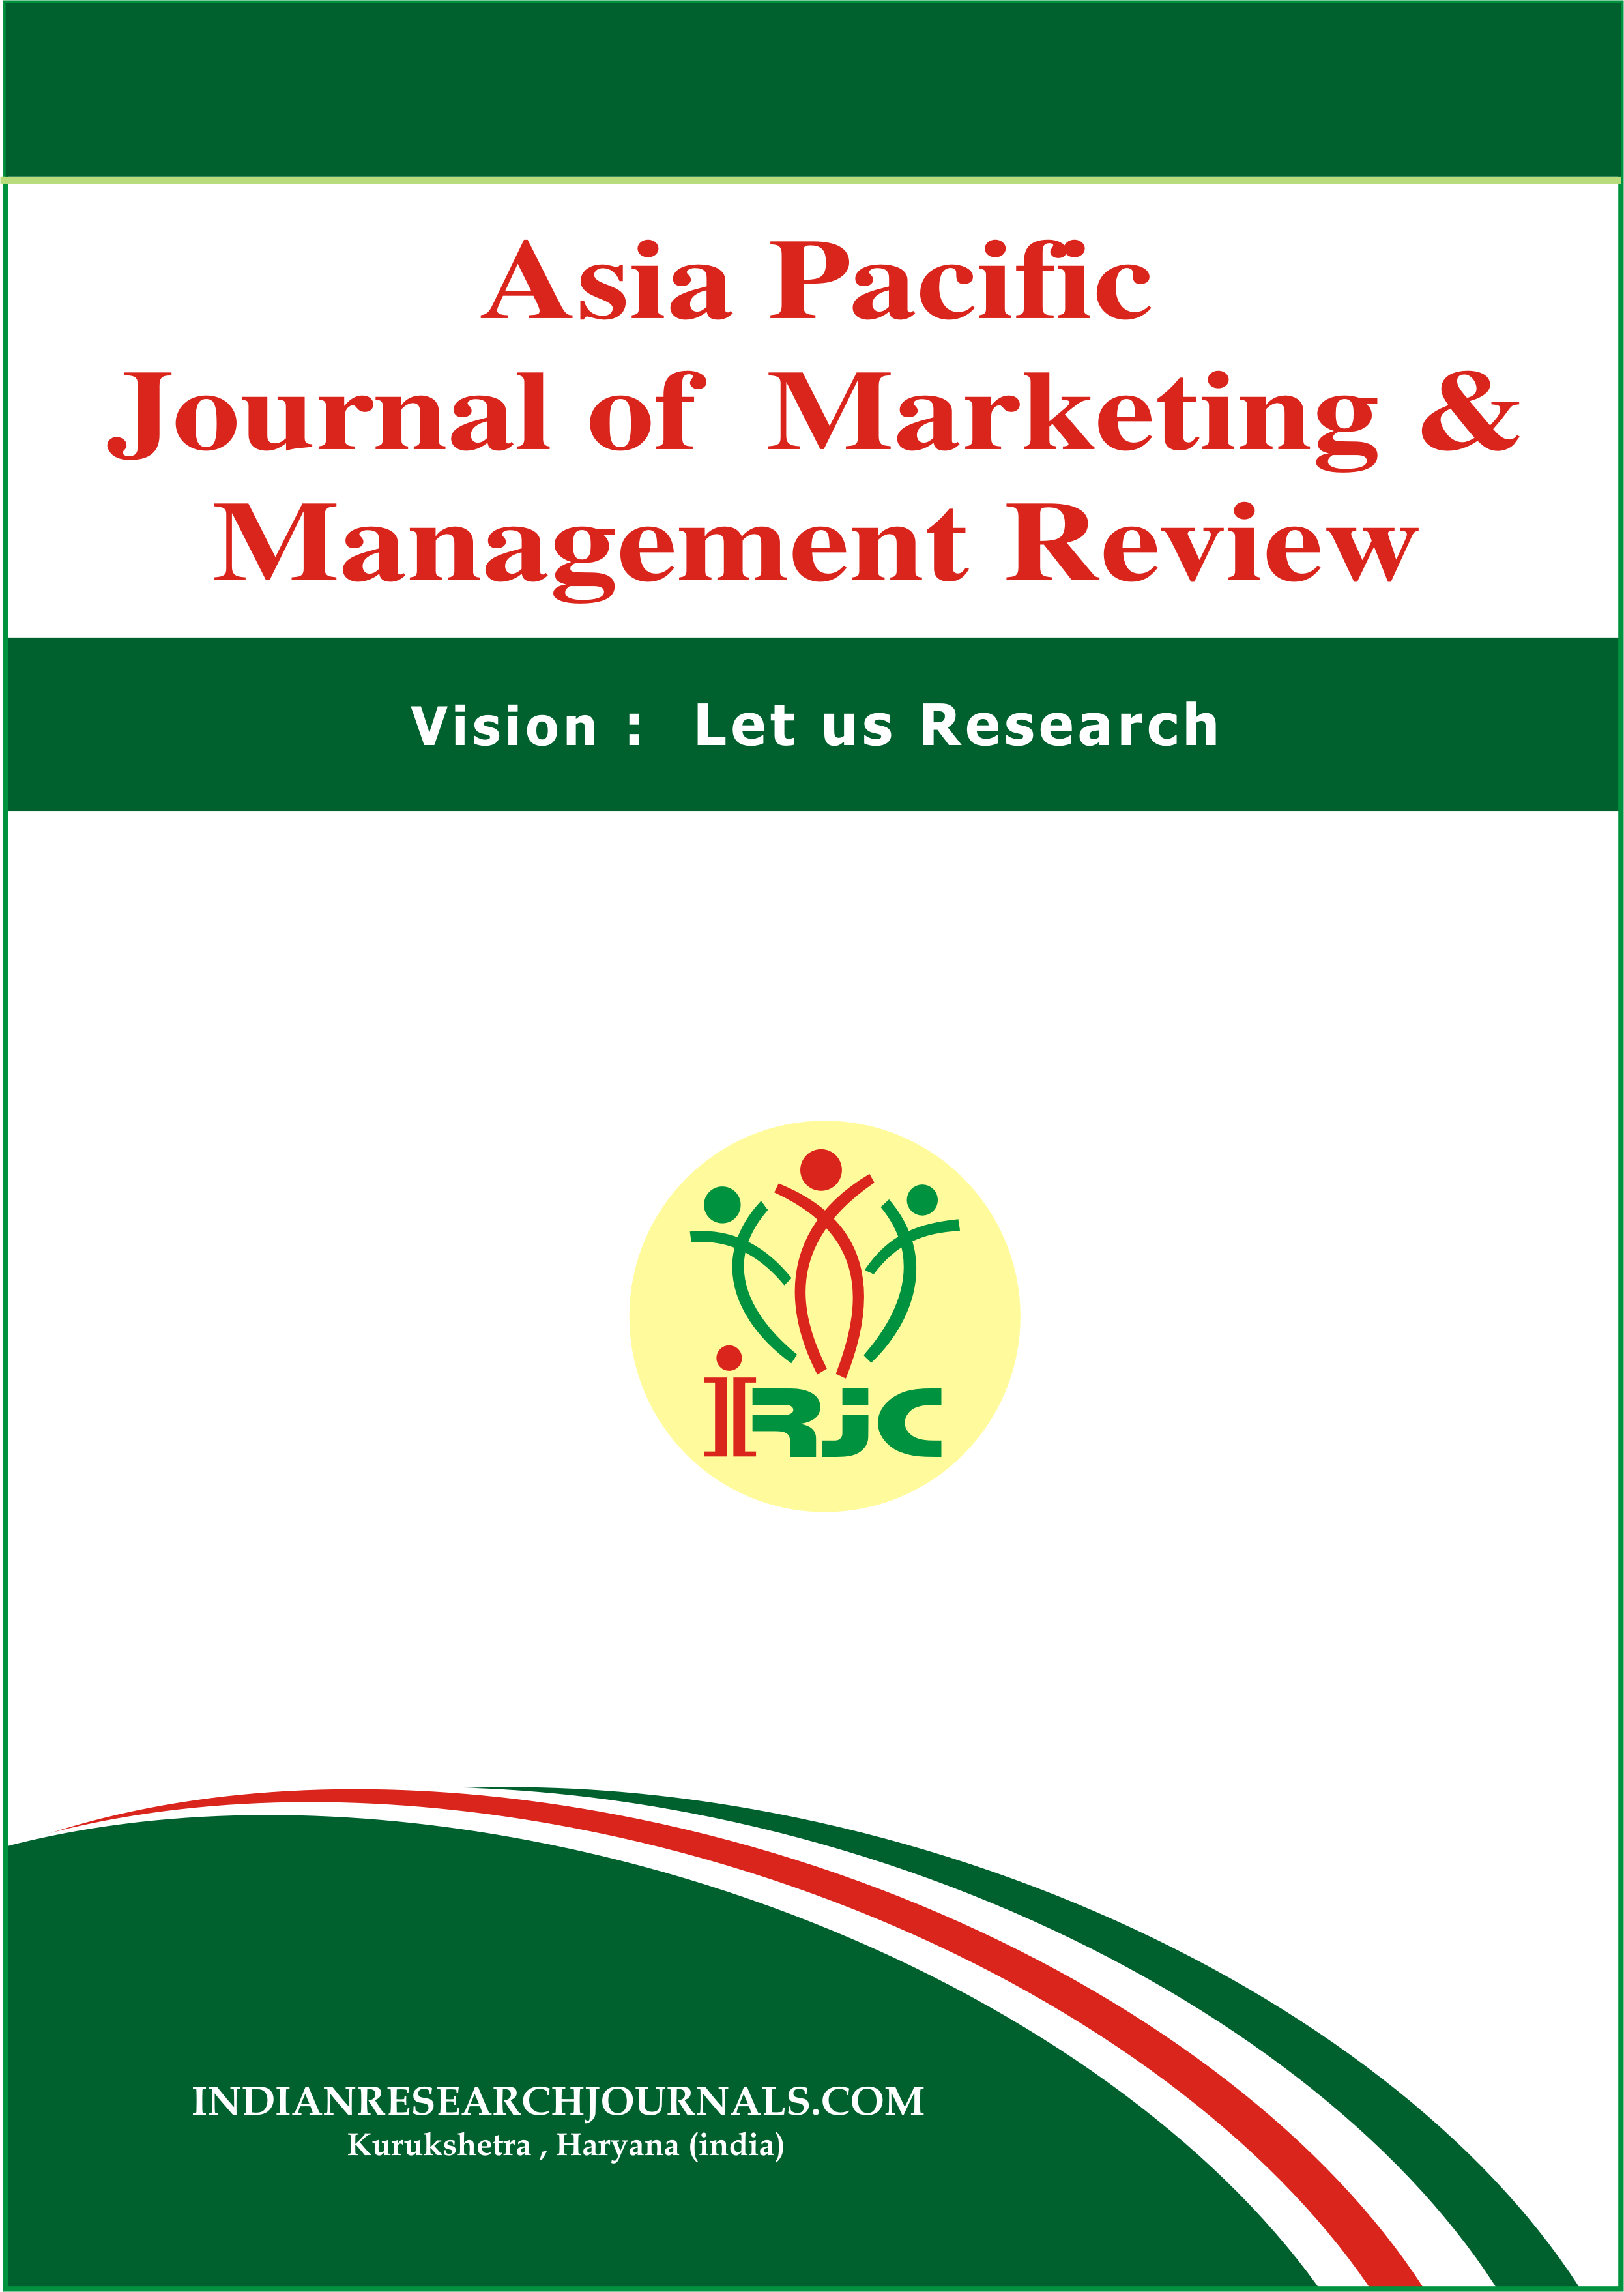 					View Vol. 12 No. 02 (2023): ASIA PACIFIC JOURNAL OF MARKETING & MANAGEMENT REVIEW
				